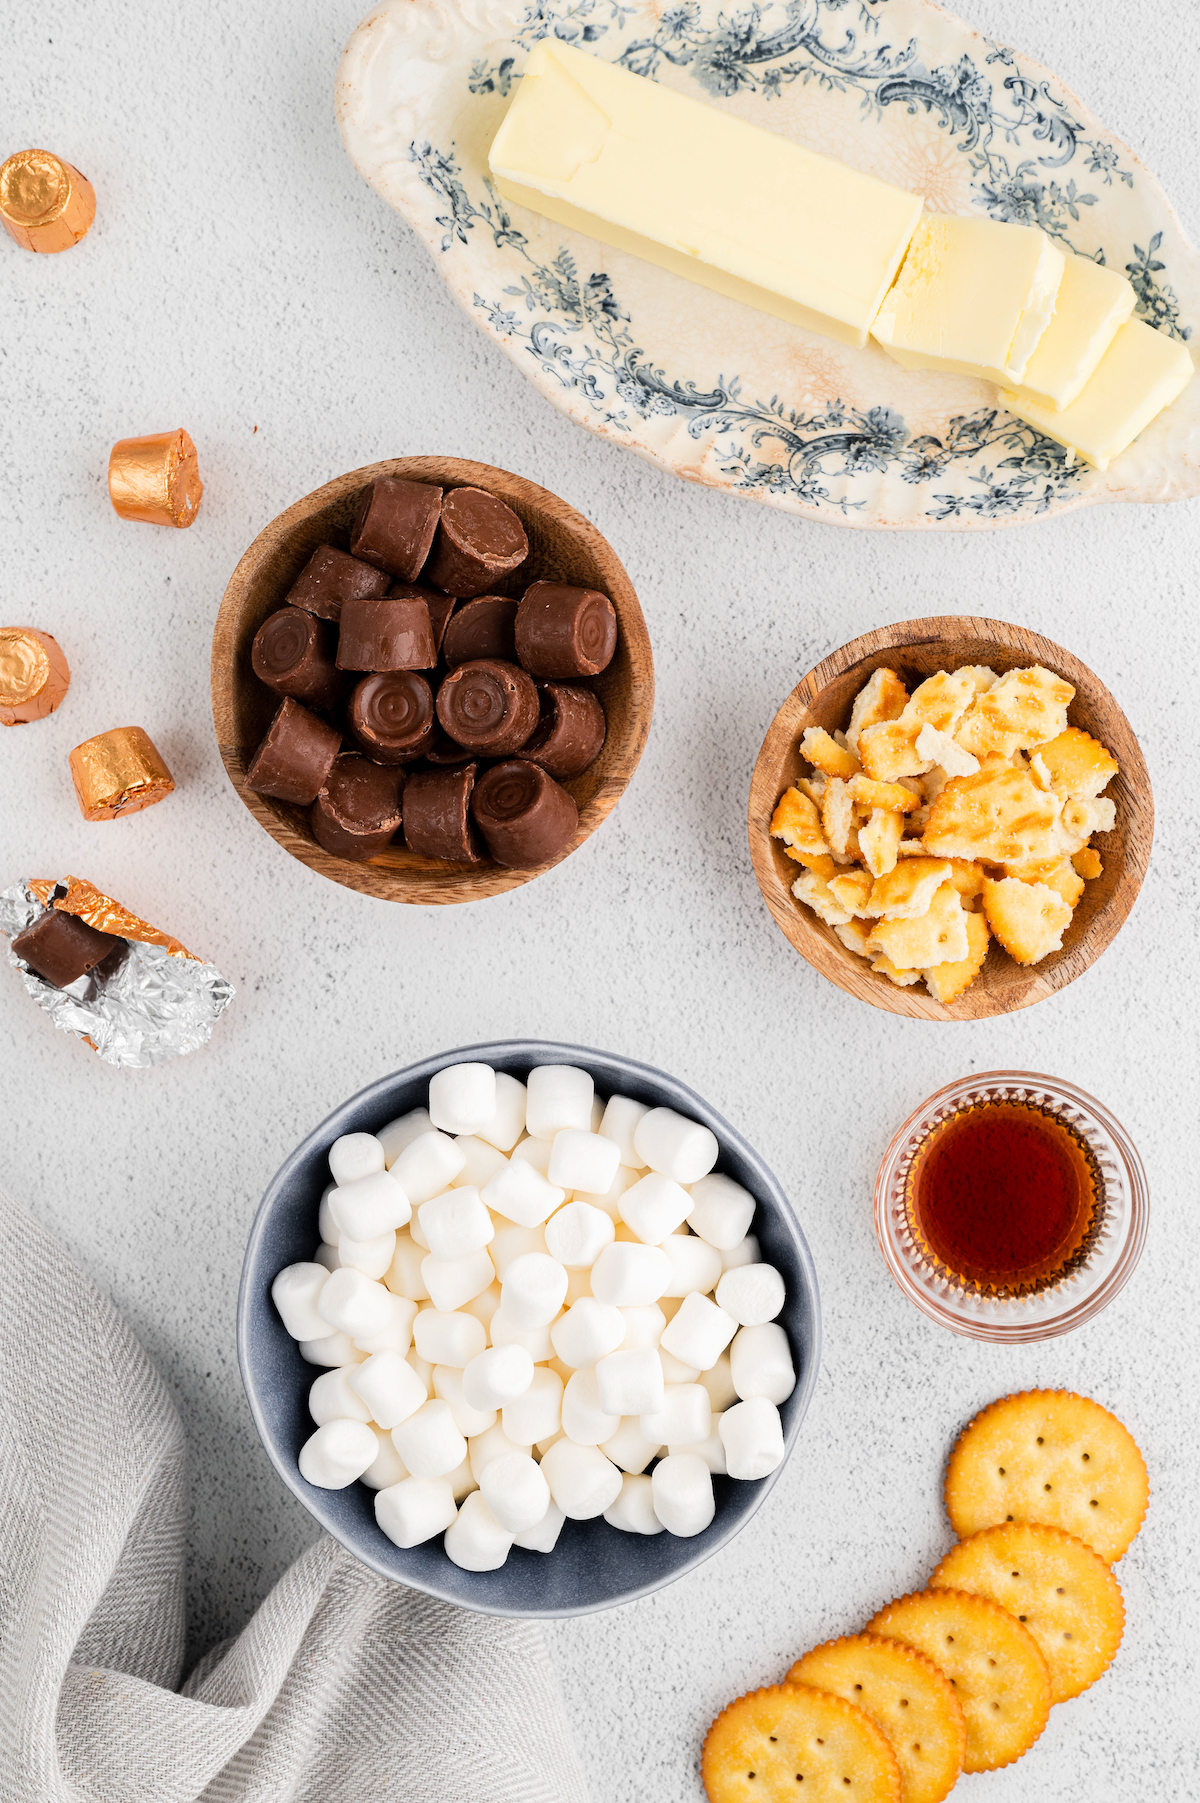 From top left: Rolo candies, butter, crushed and broken Ritz crackers, mini marshmallows, vanilla extract.